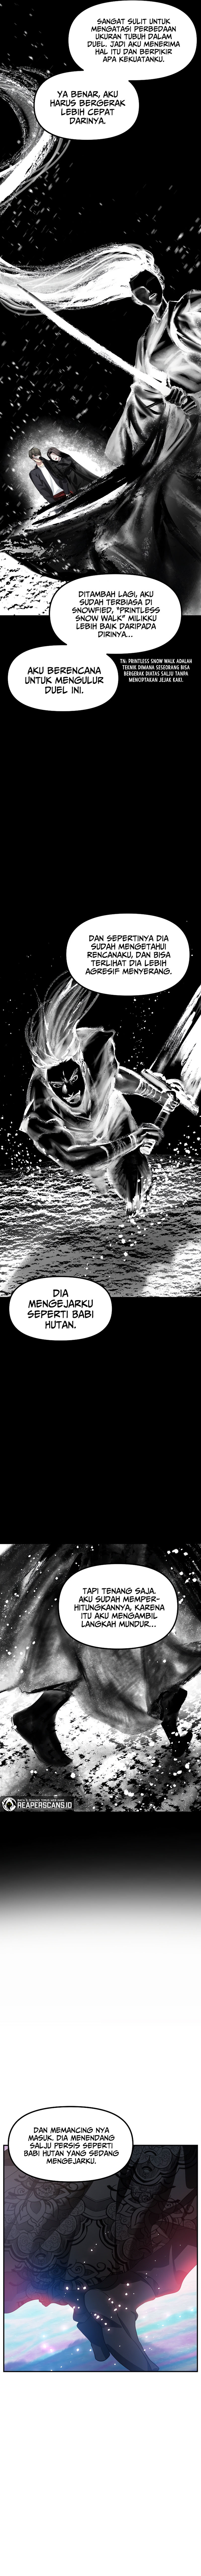 sss-class-suicide-hunter Chapter 77